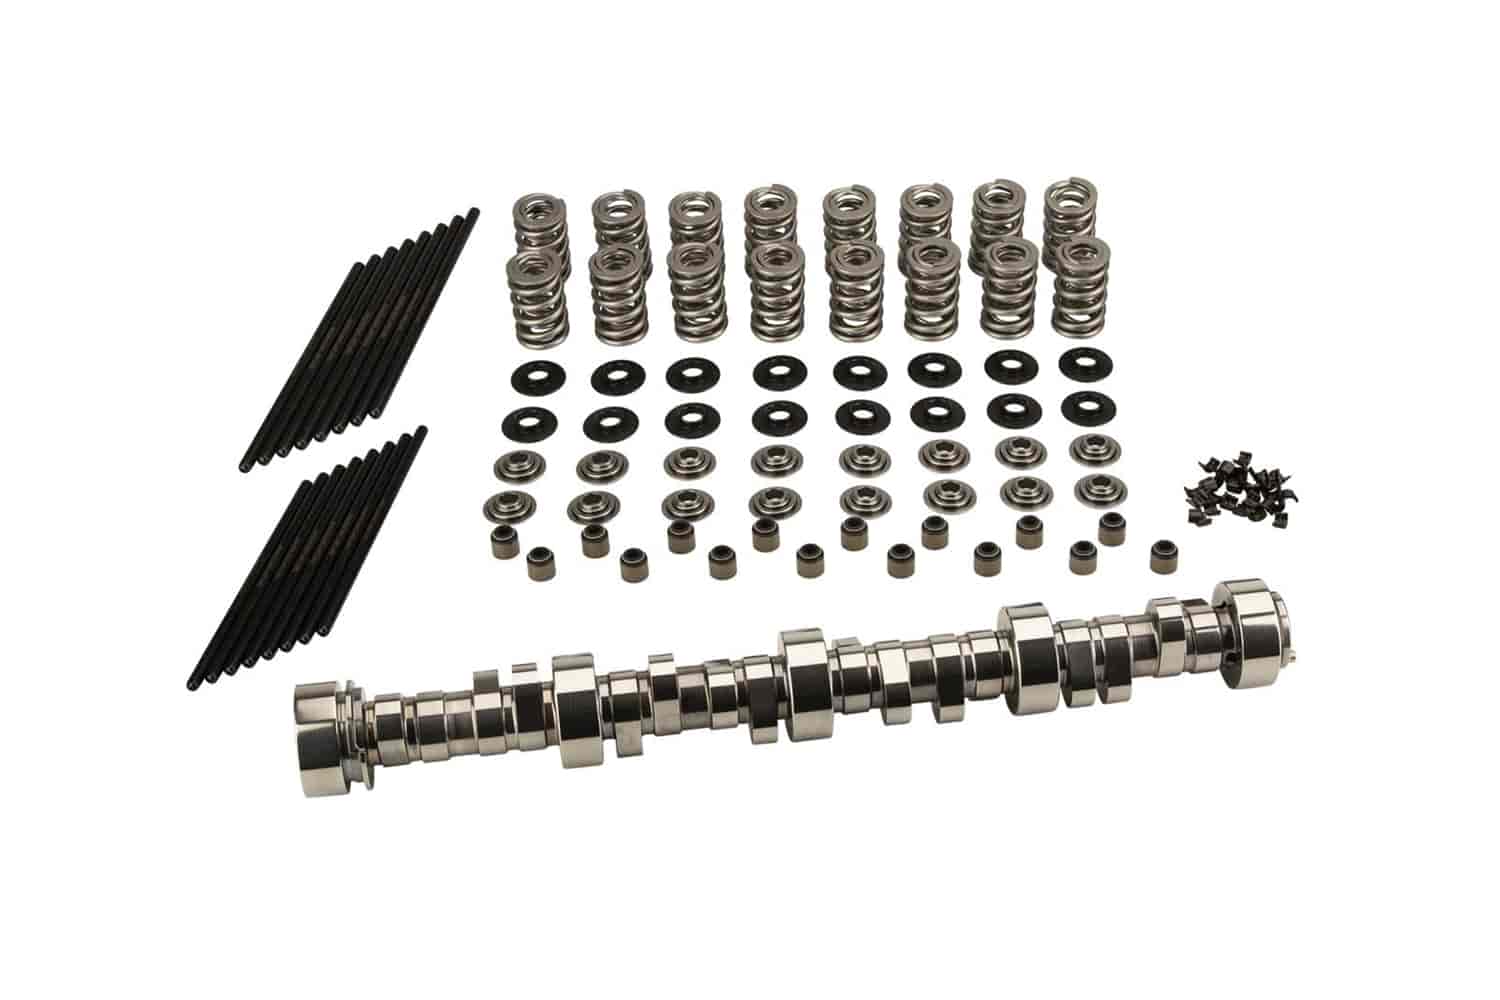 CK54-702-11 Thumpr LS Stage II Camshaft Package, GM LS 4.8/5.3/6.0L, Hydraulic Roller Tappet